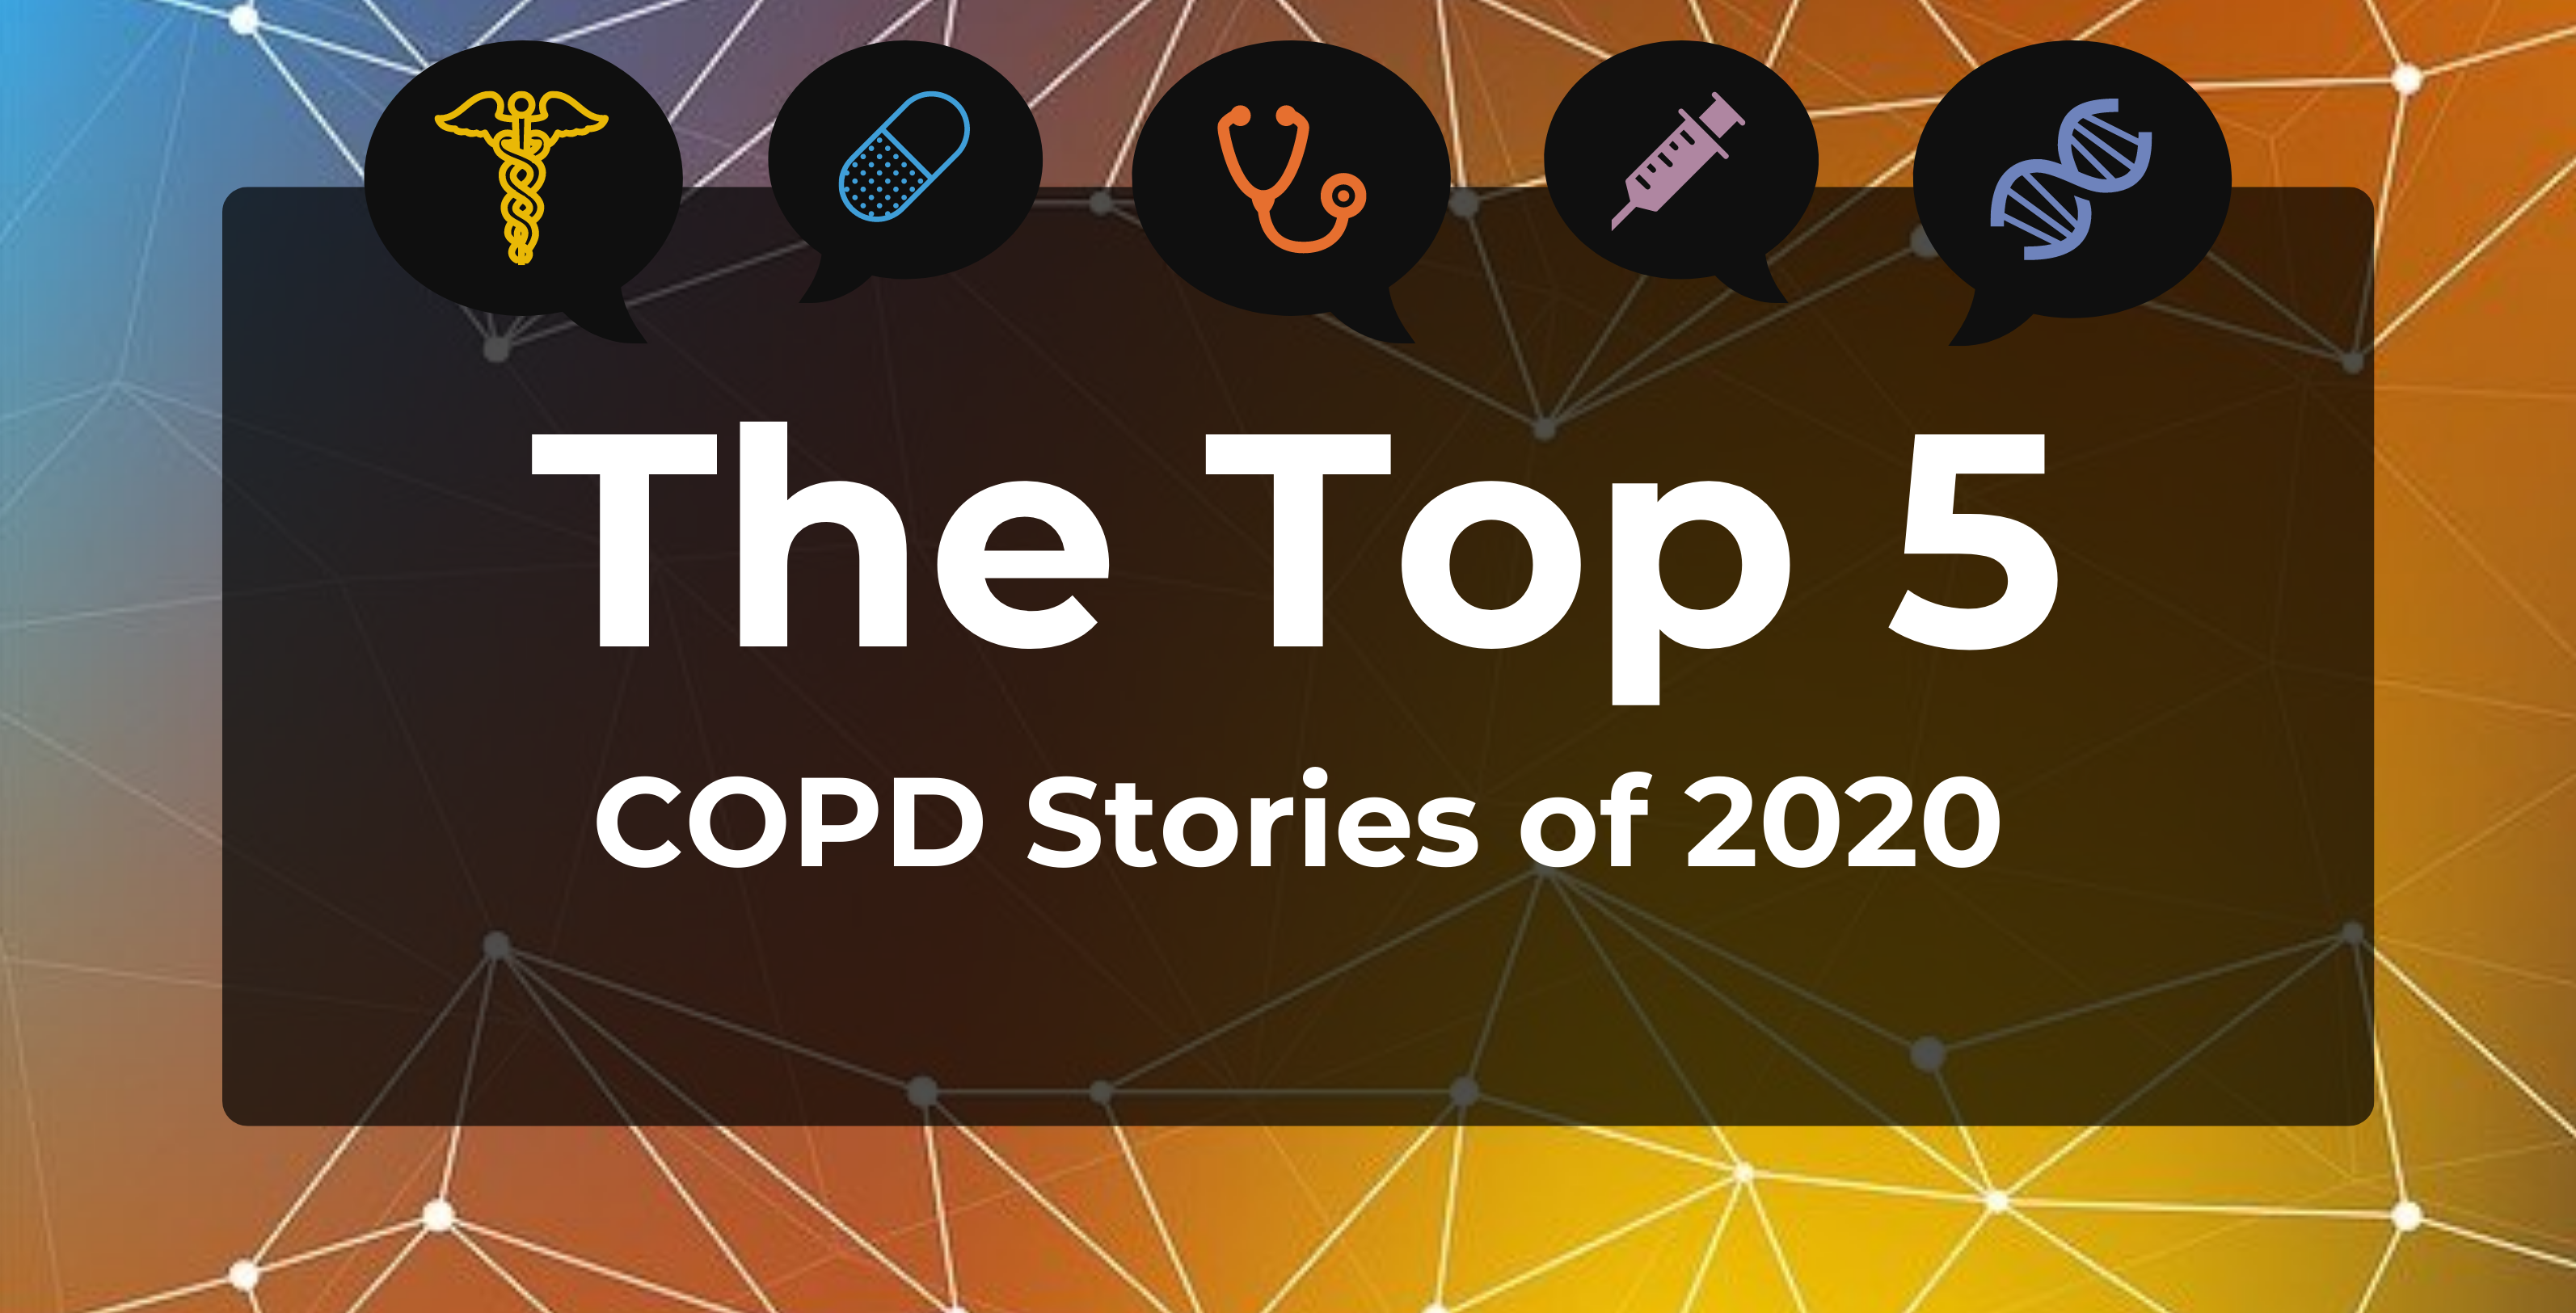 Top 5 Most-Read COPD Stories of 2020